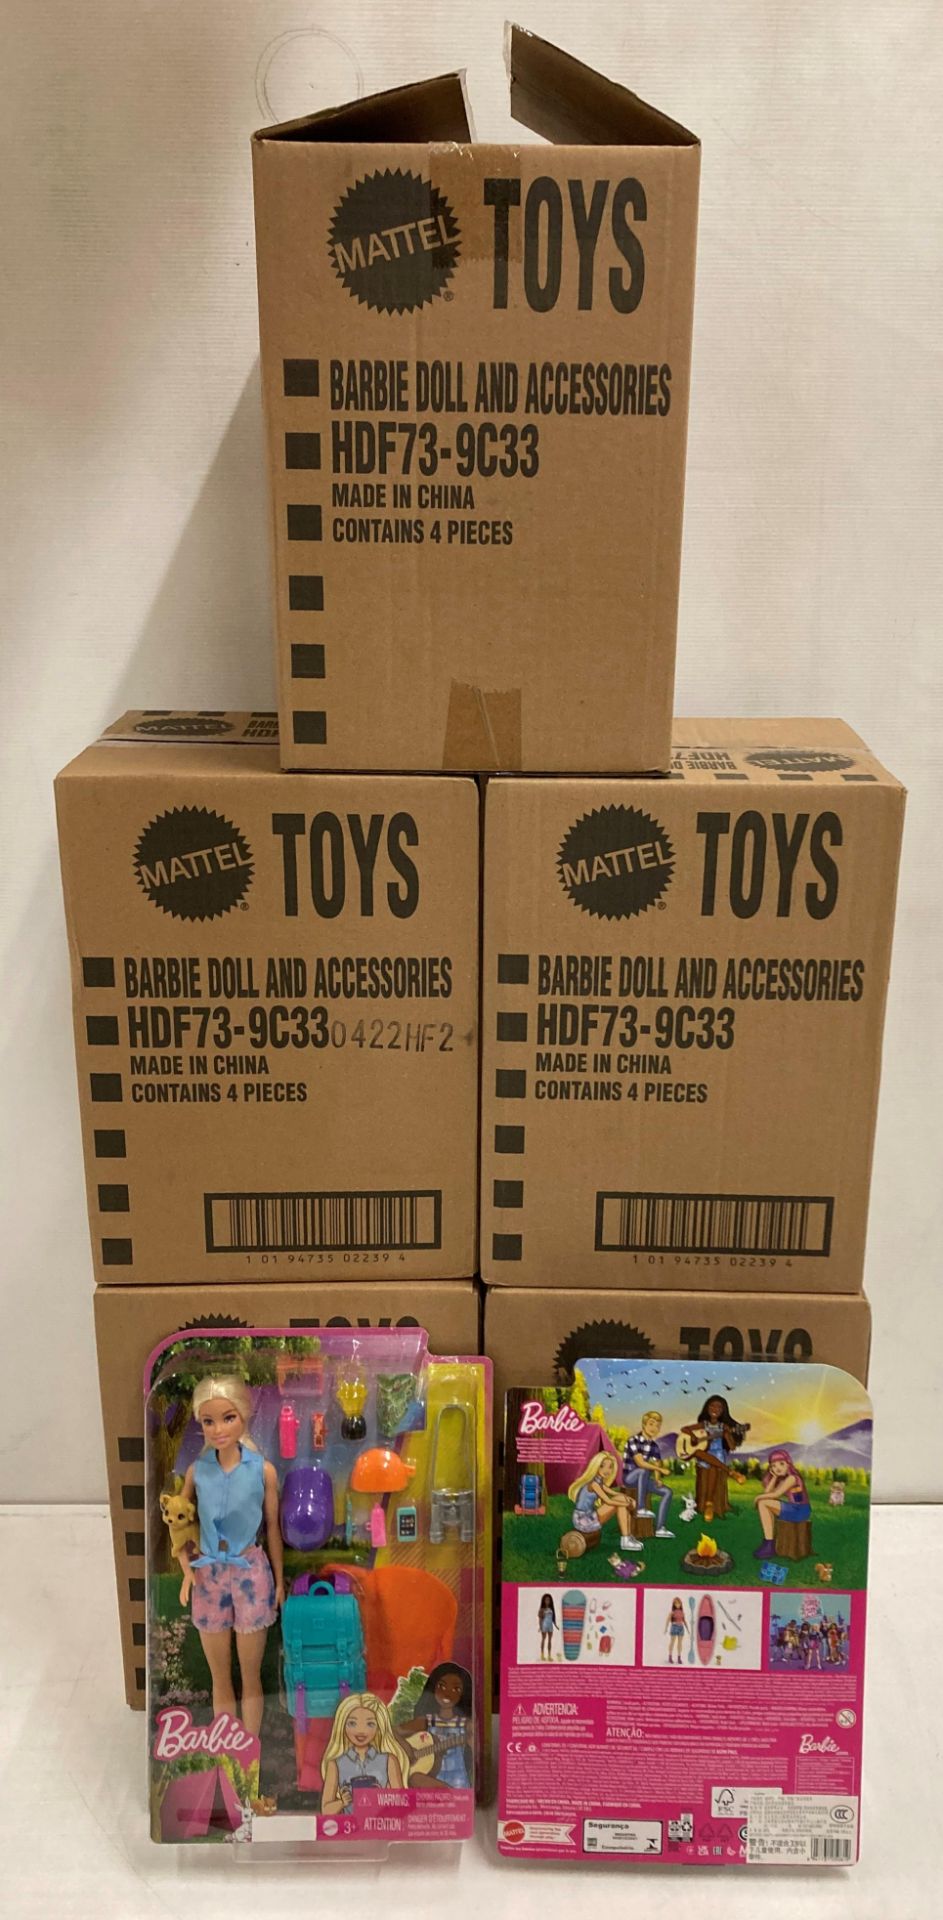 20 x Barbie 'It Takes Two' Malibu Barbie camping doll sets (5 x outer boxes) (saleroom location: